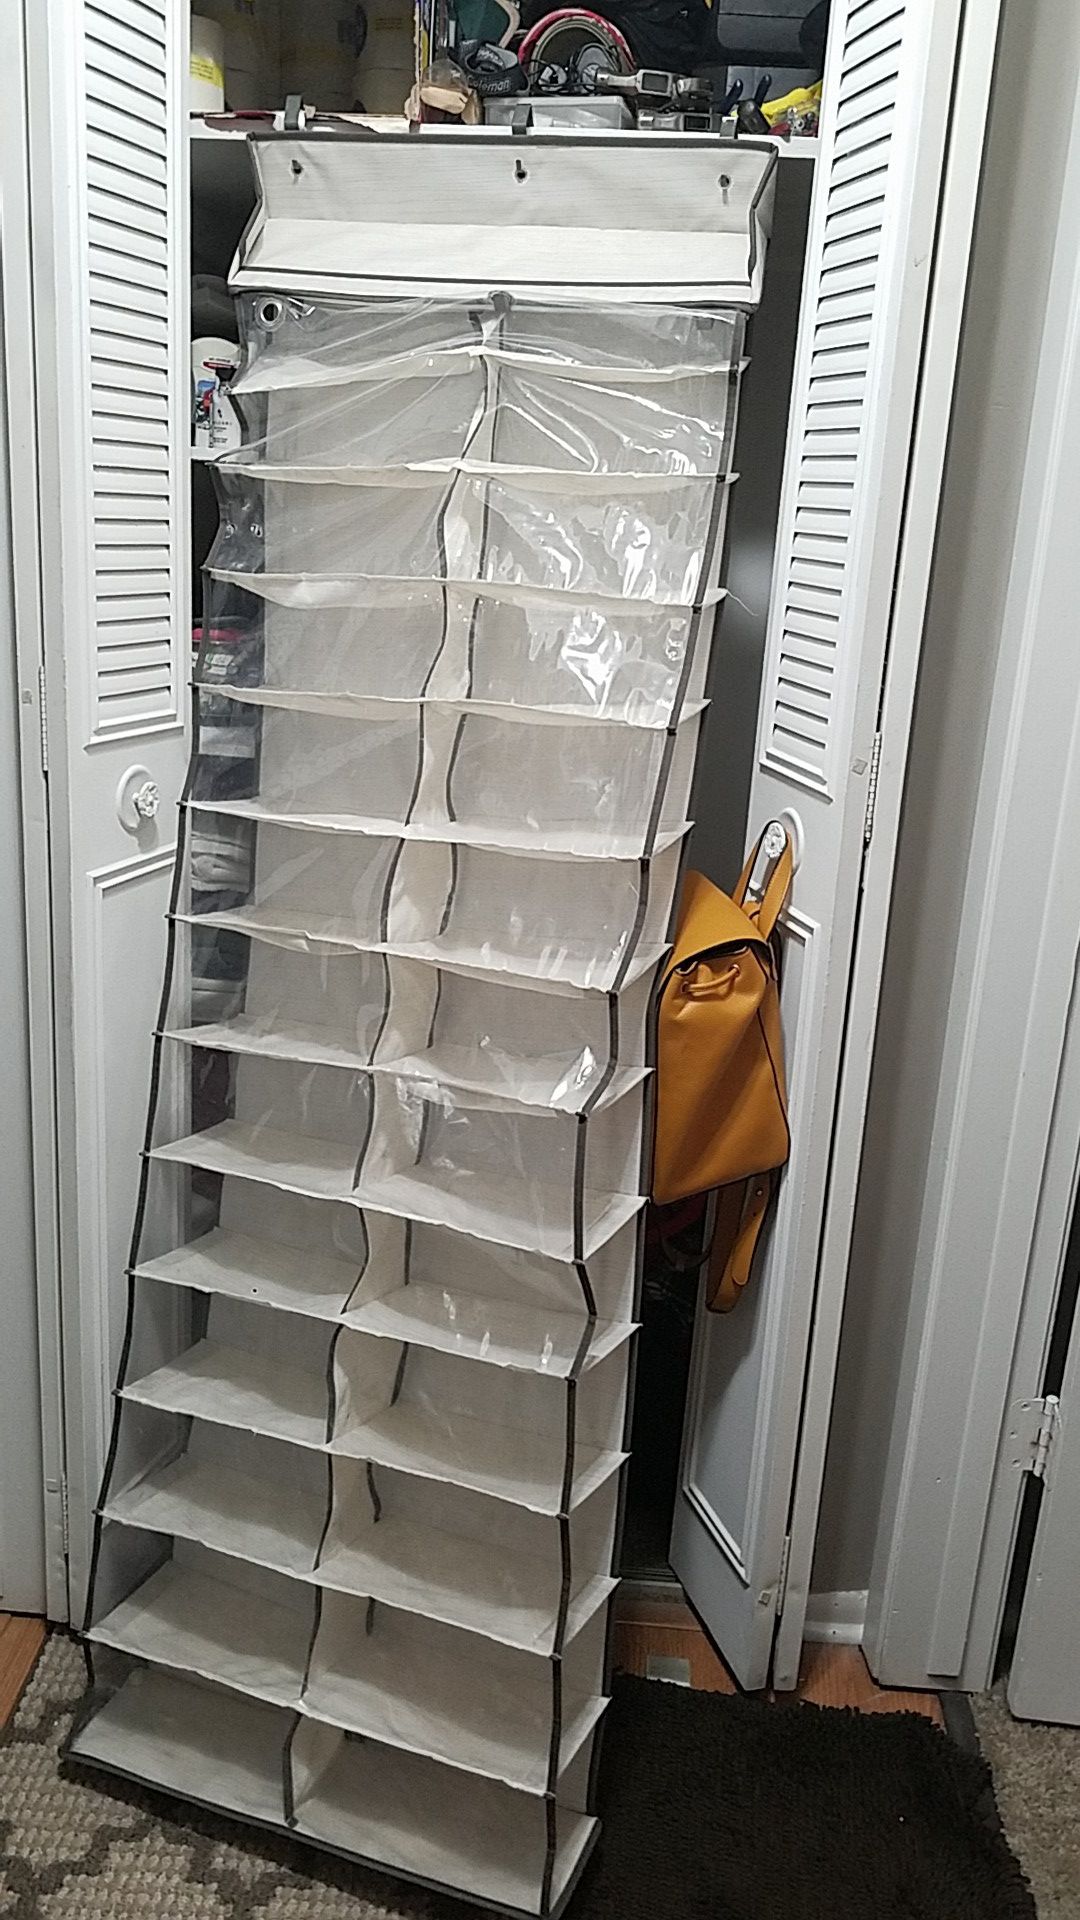 Shoes organizer on the door holds 26 pairs